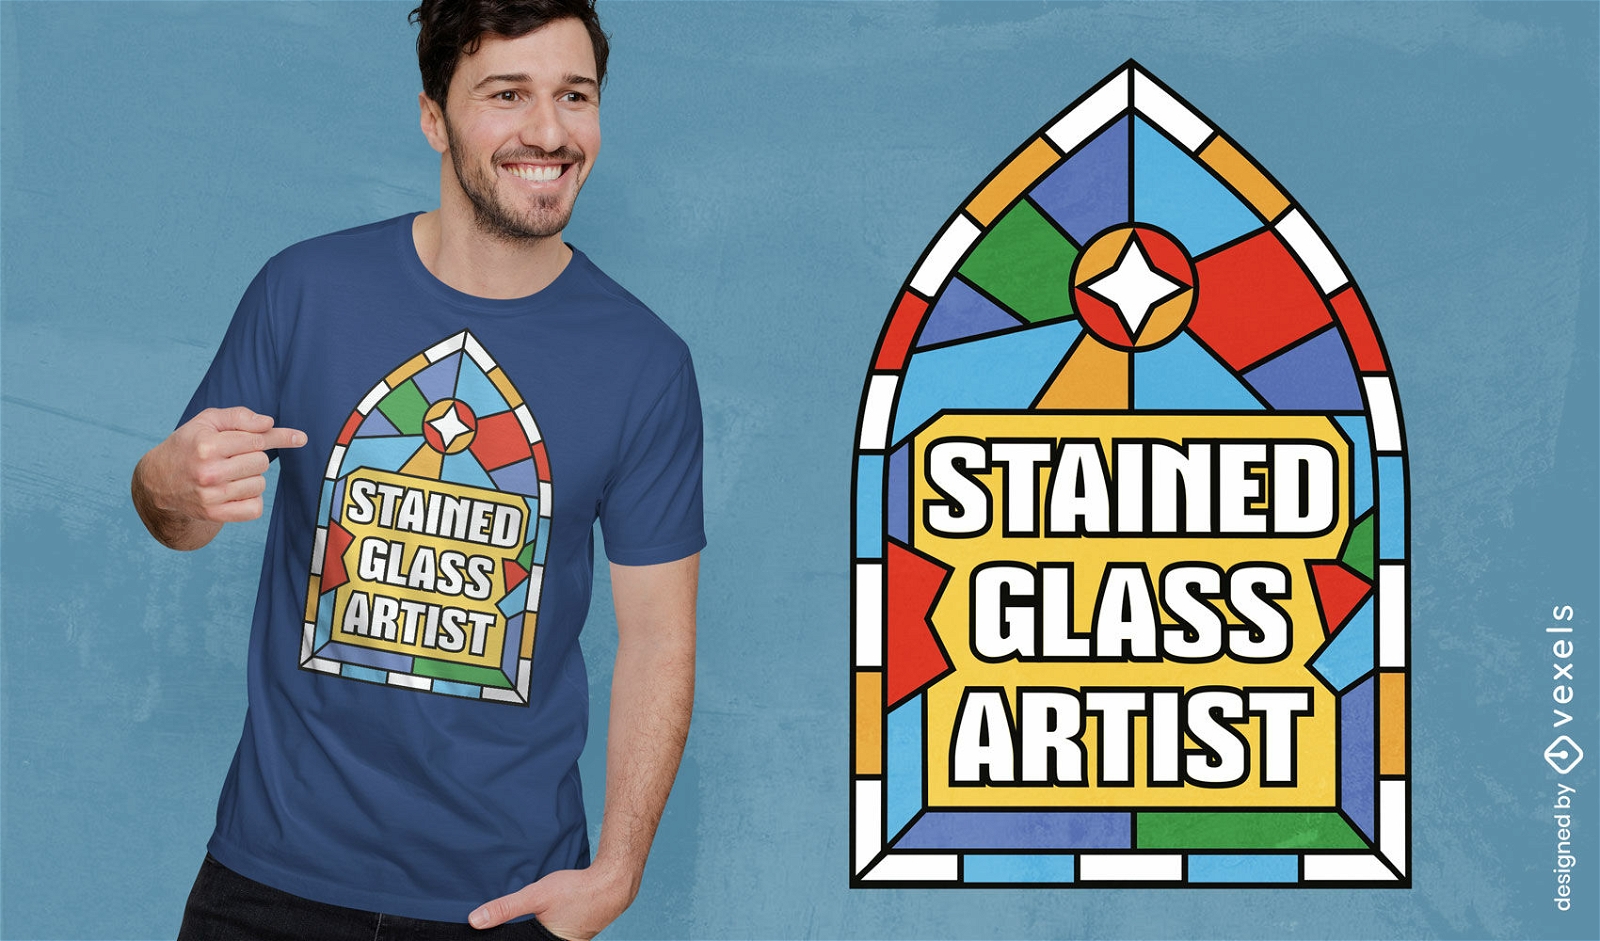 Stained glass artist quote t-shirt design